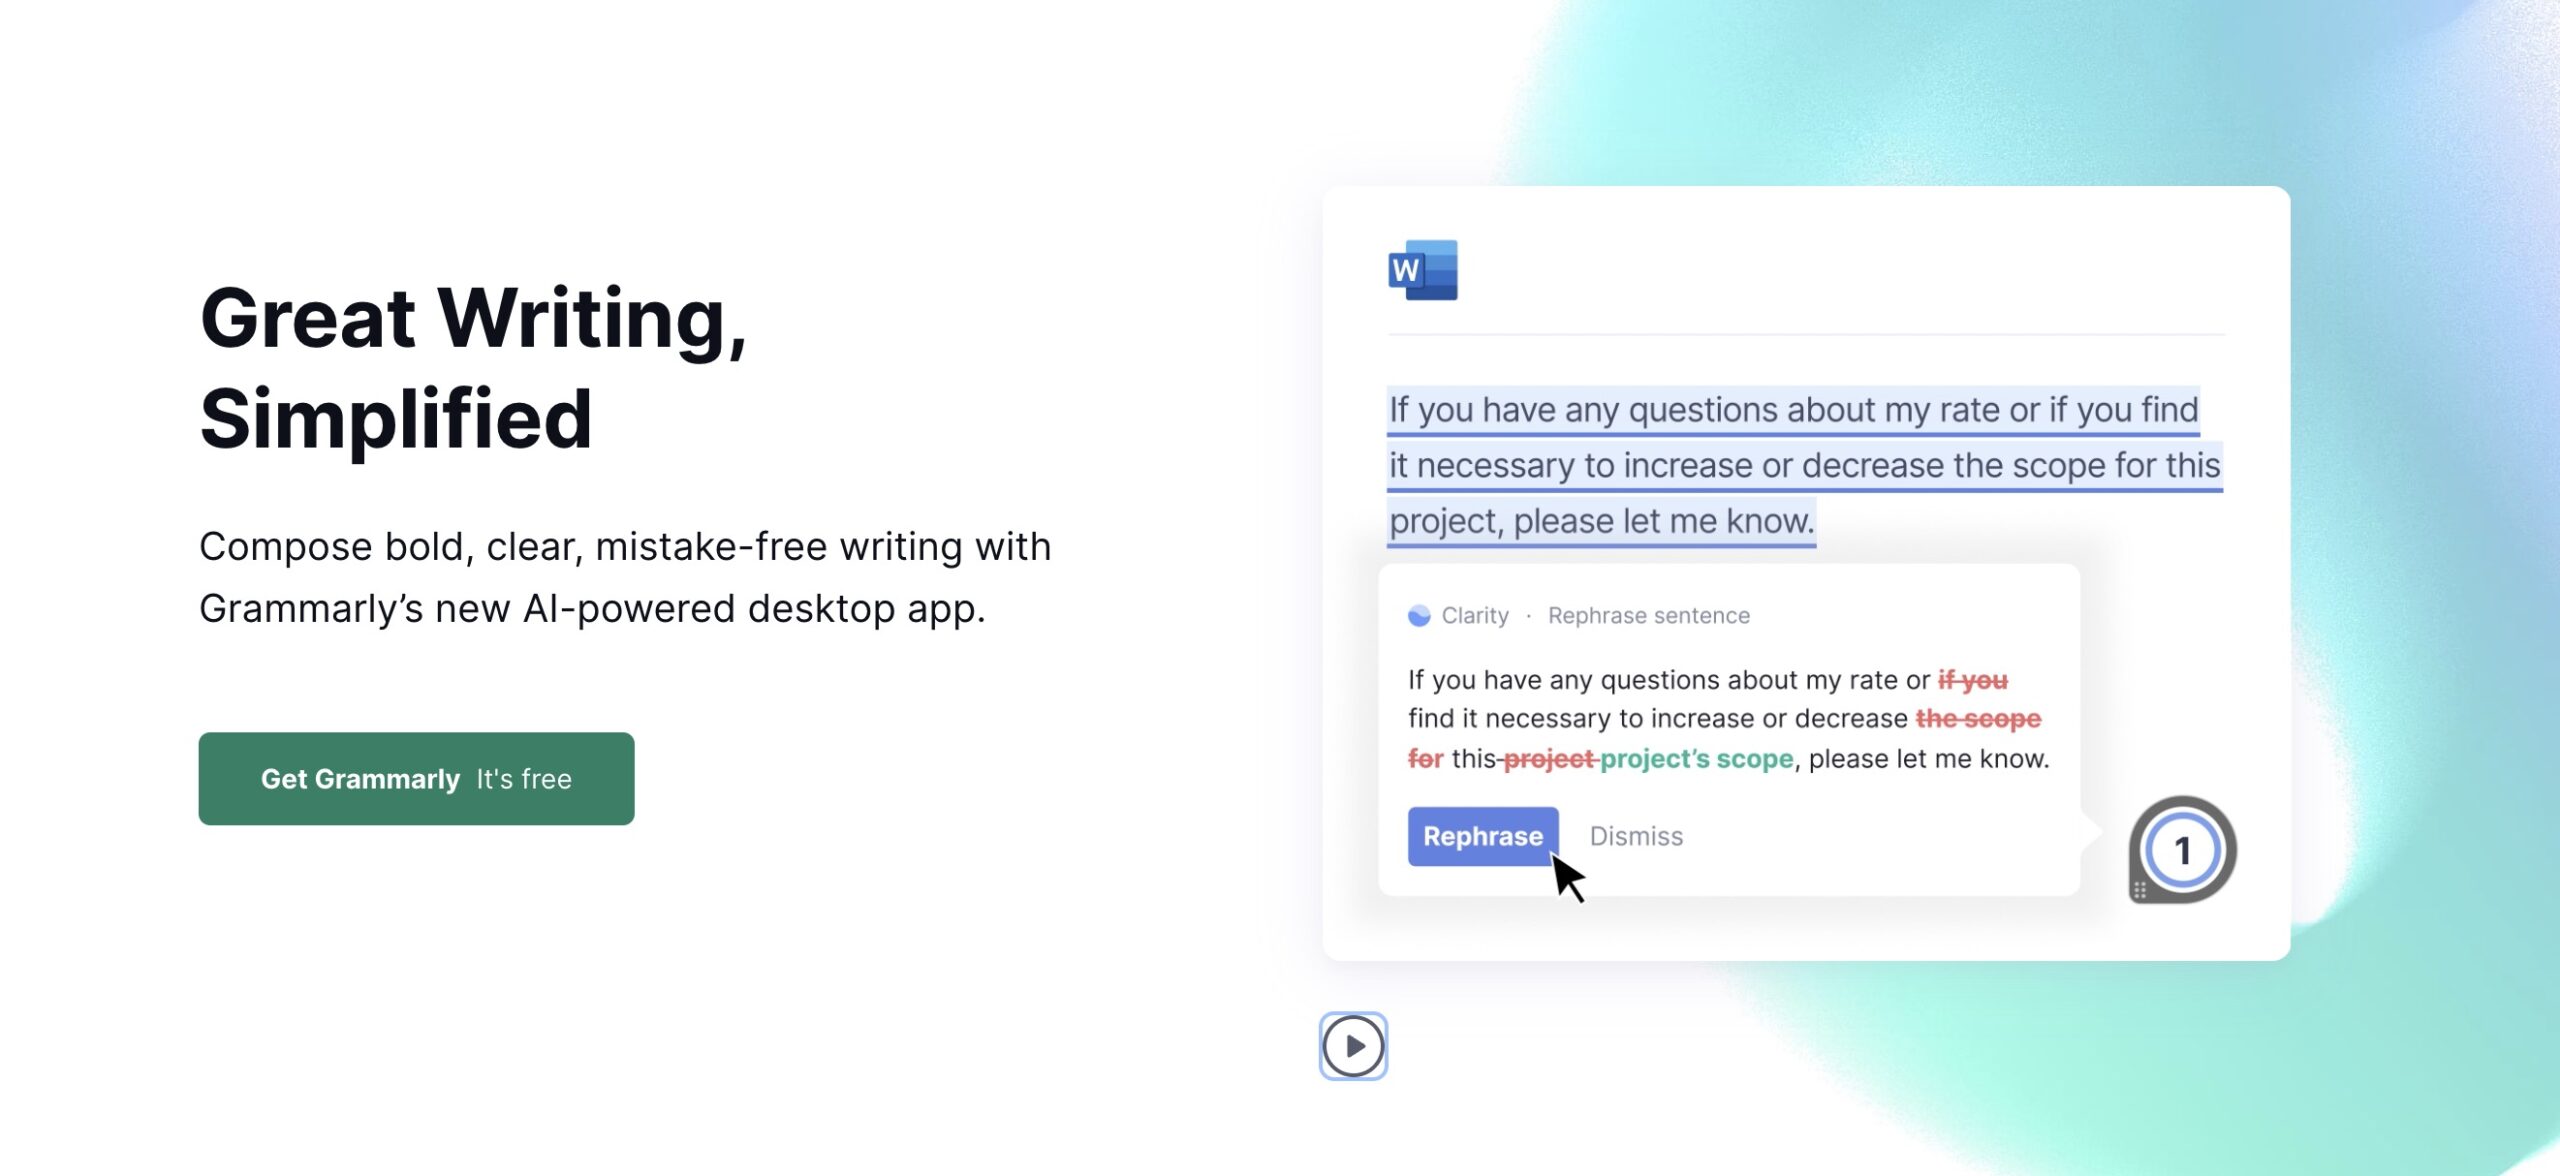 Grammarly AI writing tool for photographers